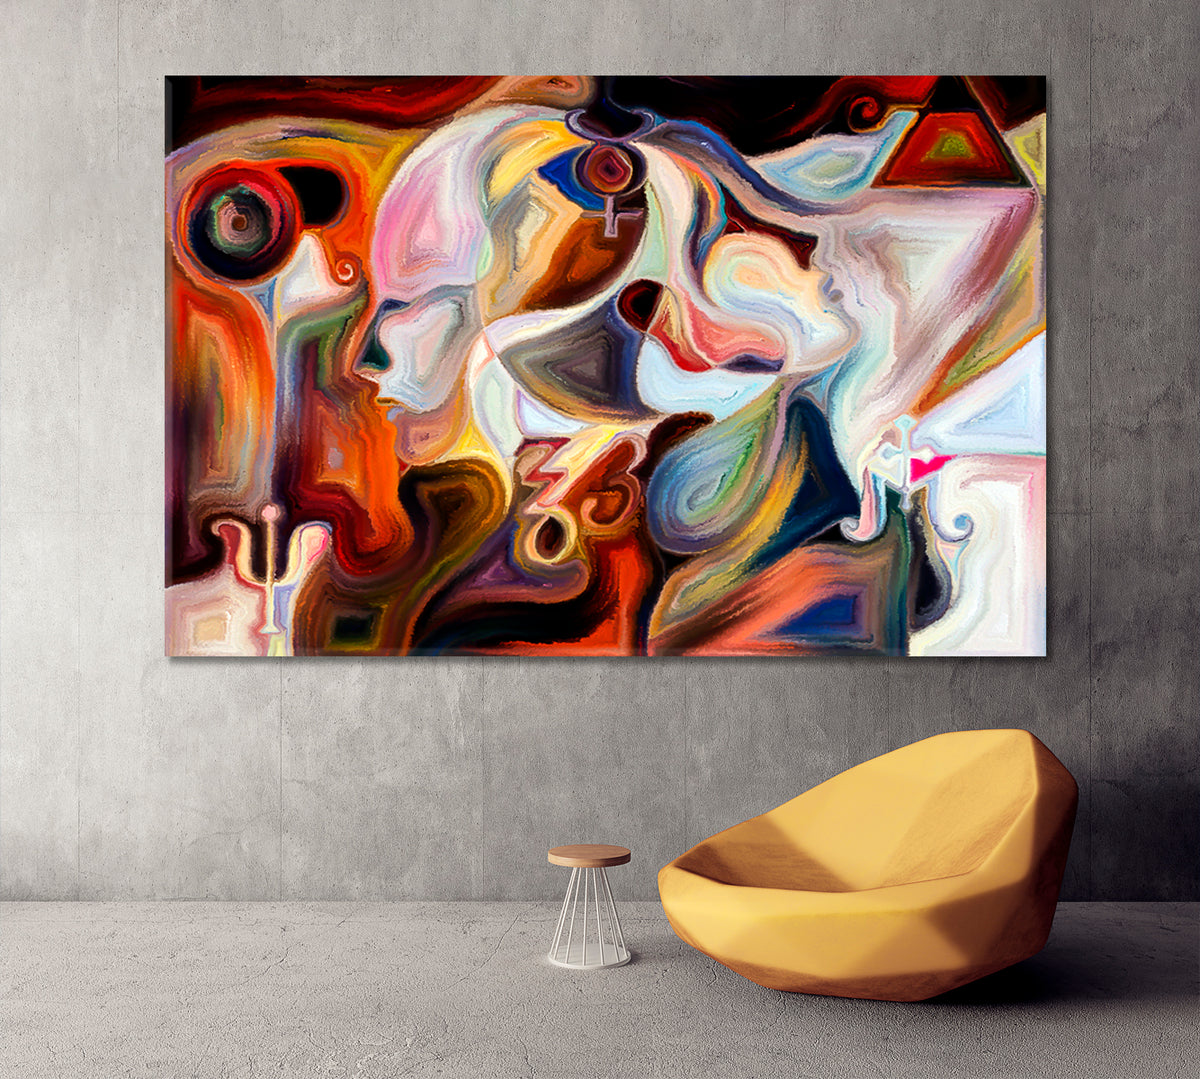 Inner Colors. Human Profile And Colorful Vivid Paint Shapes Abstract Design Contemporary Art Artesty 1 panel 24" x 16" 